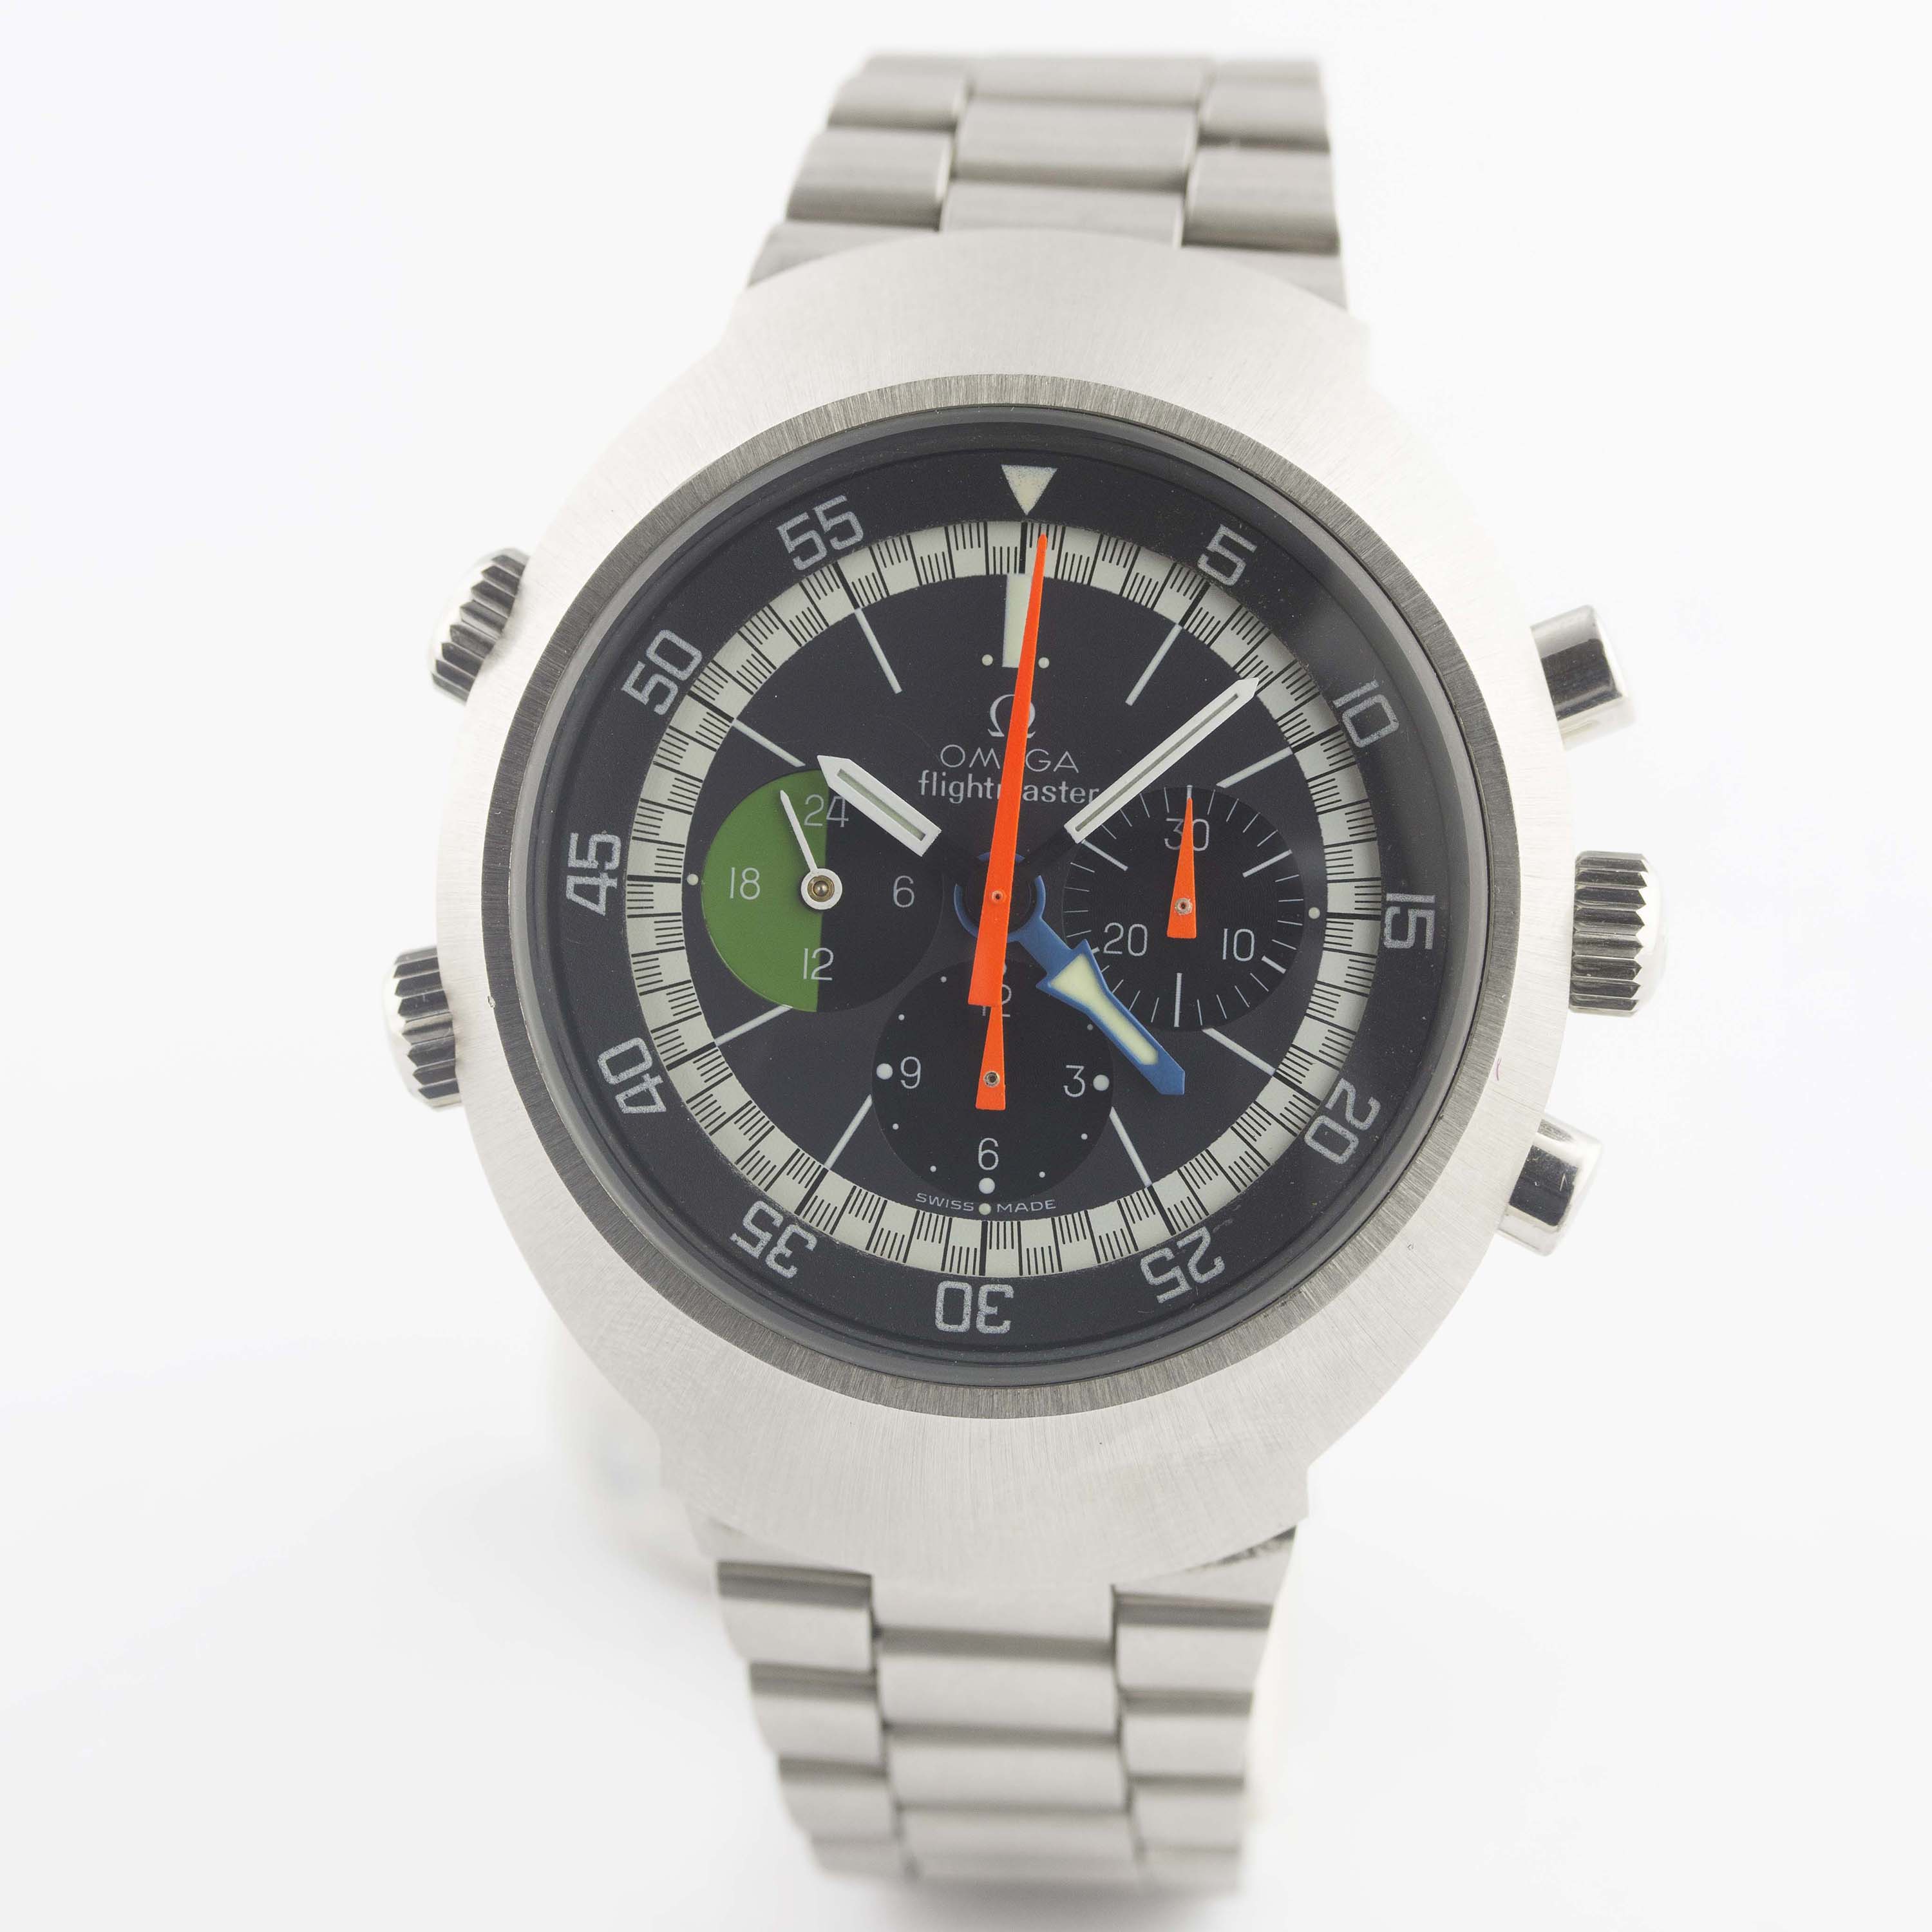 A GENTLEMAN'S STAINLESS STEEL OMEGA FLIGHTMASTER CHRONOGRAPH BRACELET WATCH CIRCA 1972, REF. 145.013 - Image 2 of 11